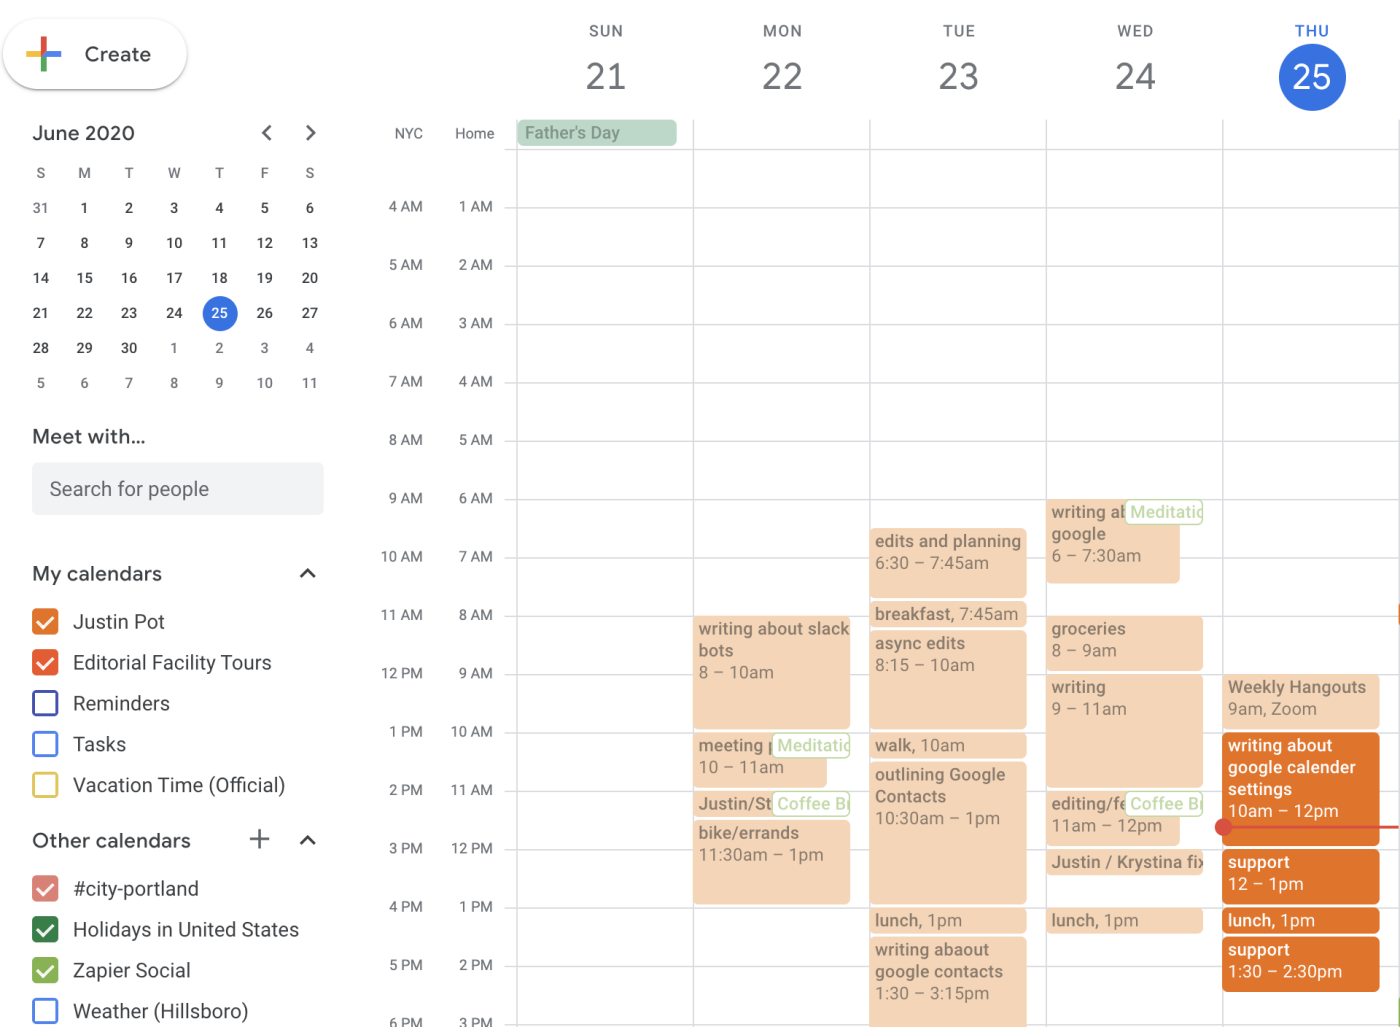 Faded past events in Google Calendar